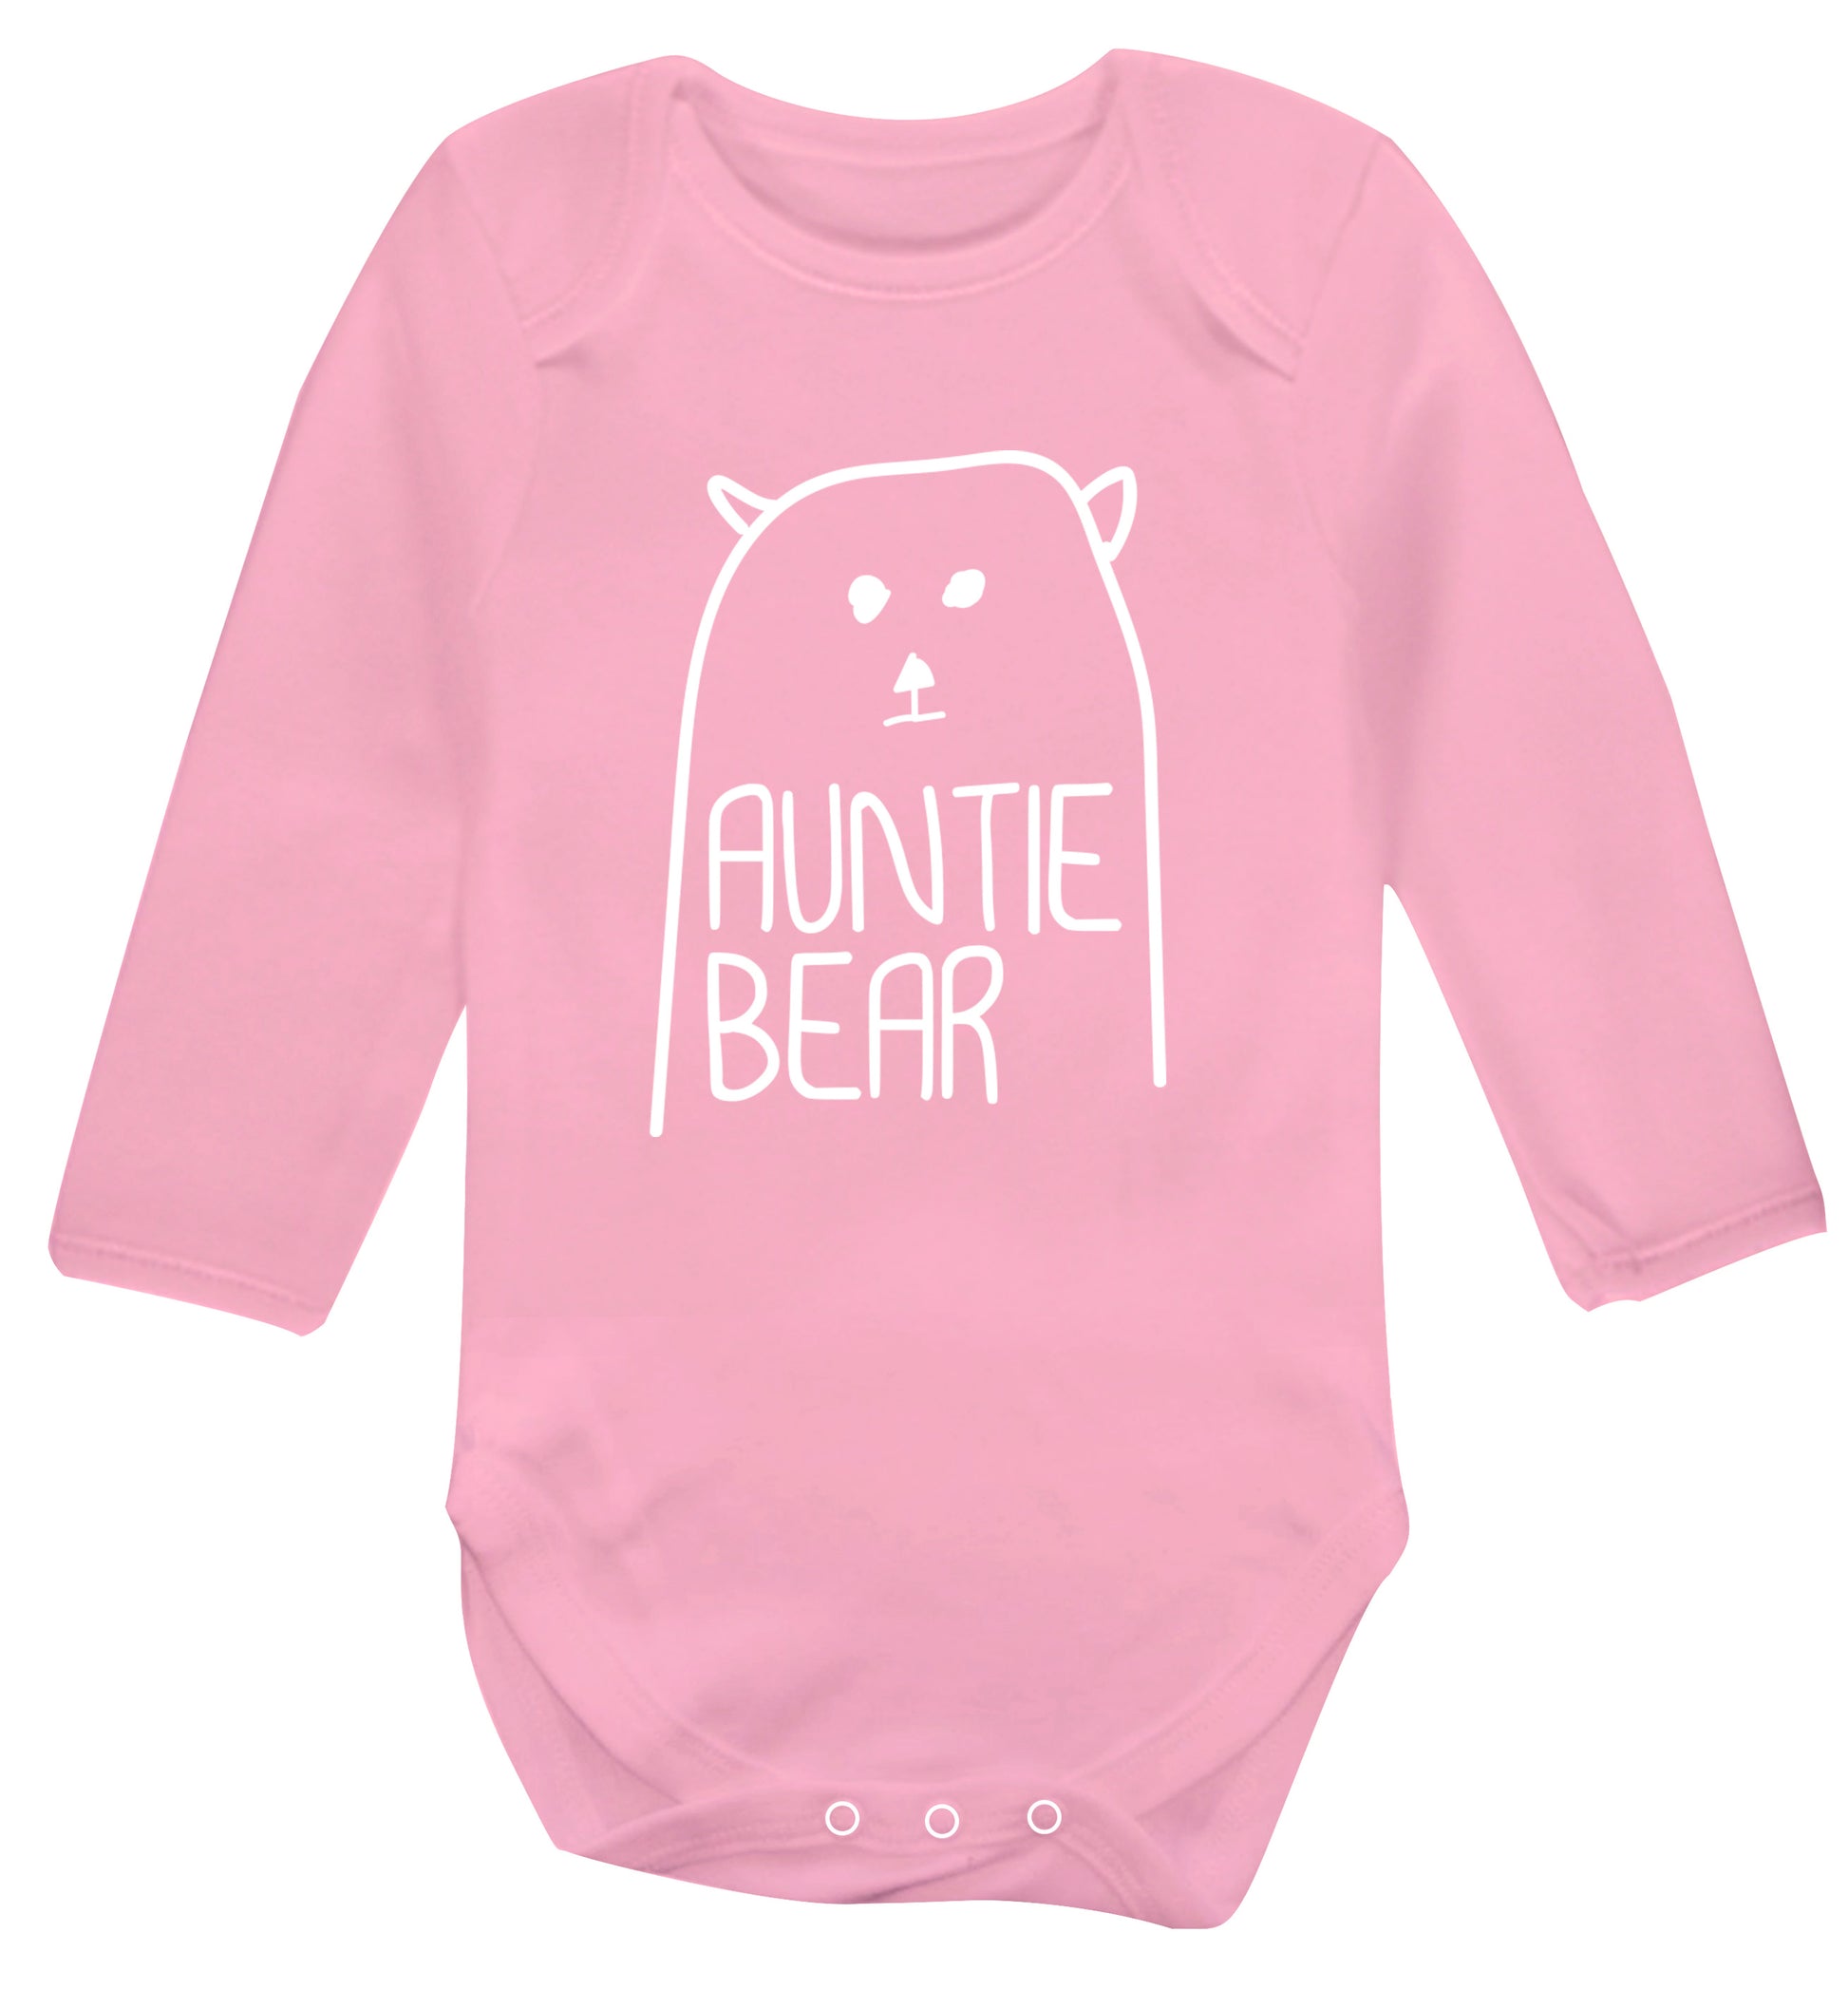 Auntie bear Baby Vest long sleeved pale pink 6-12 months